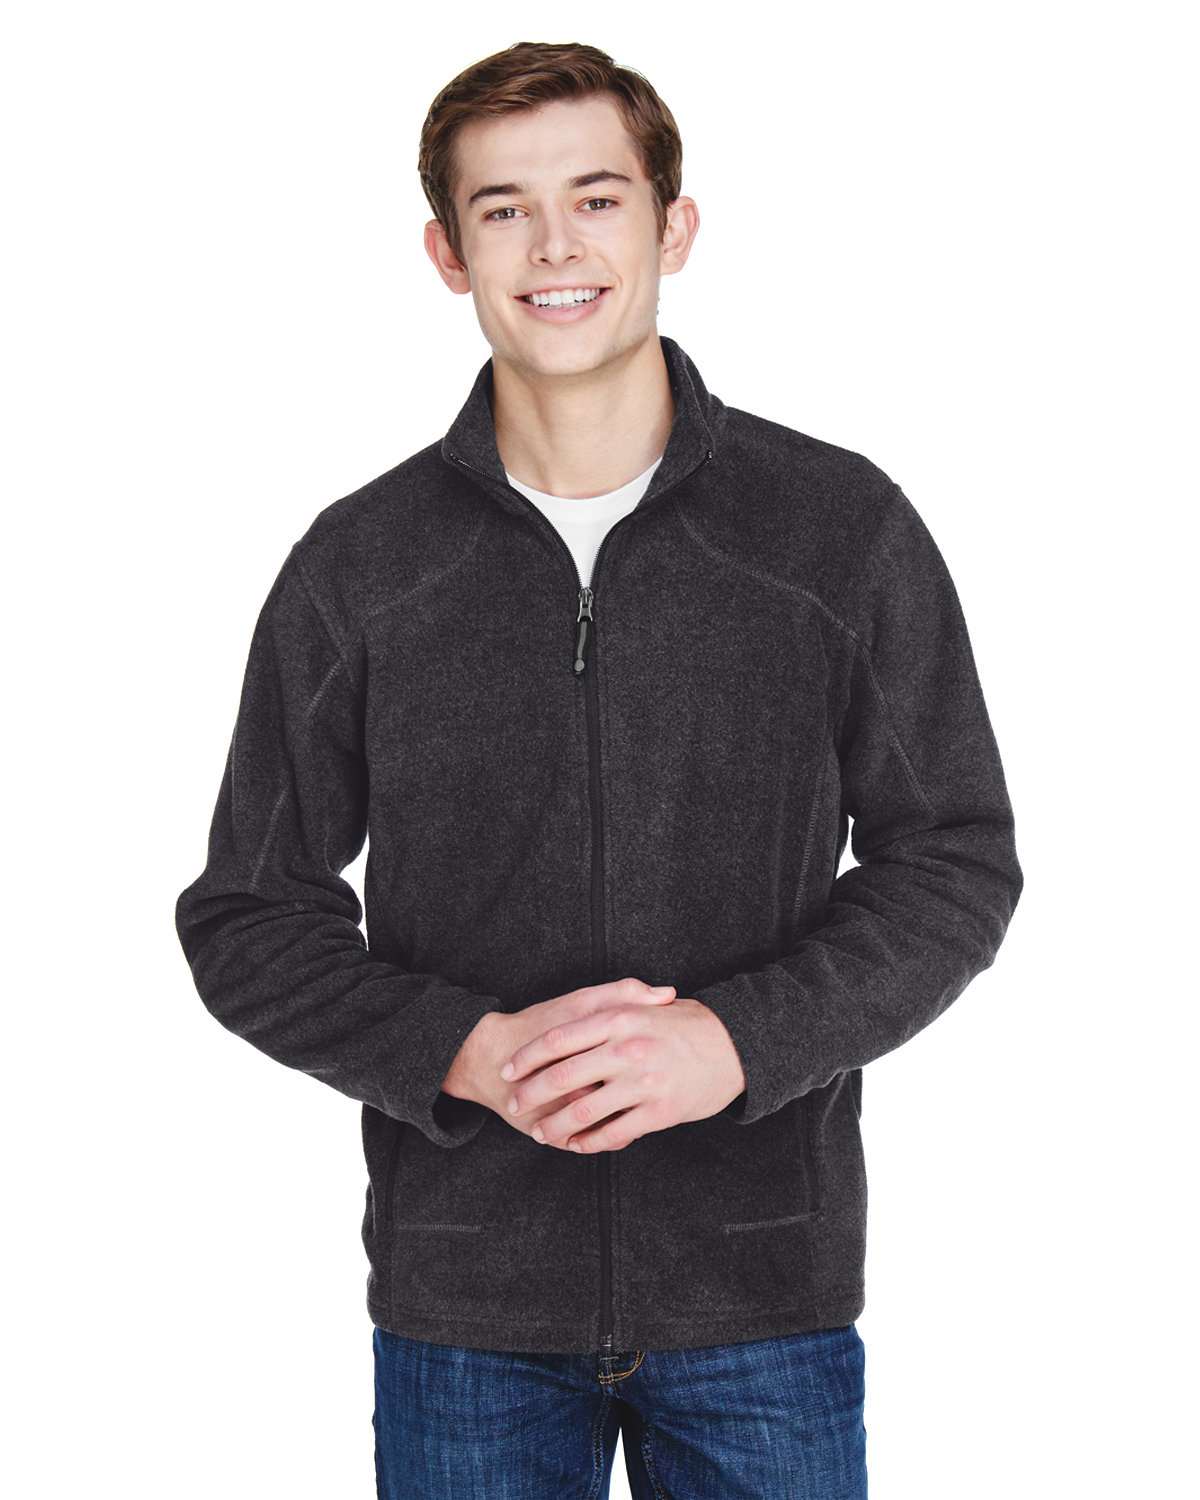 North End Men's Tall Voyage Fleece Jacket HEATHER CHARCOAL 